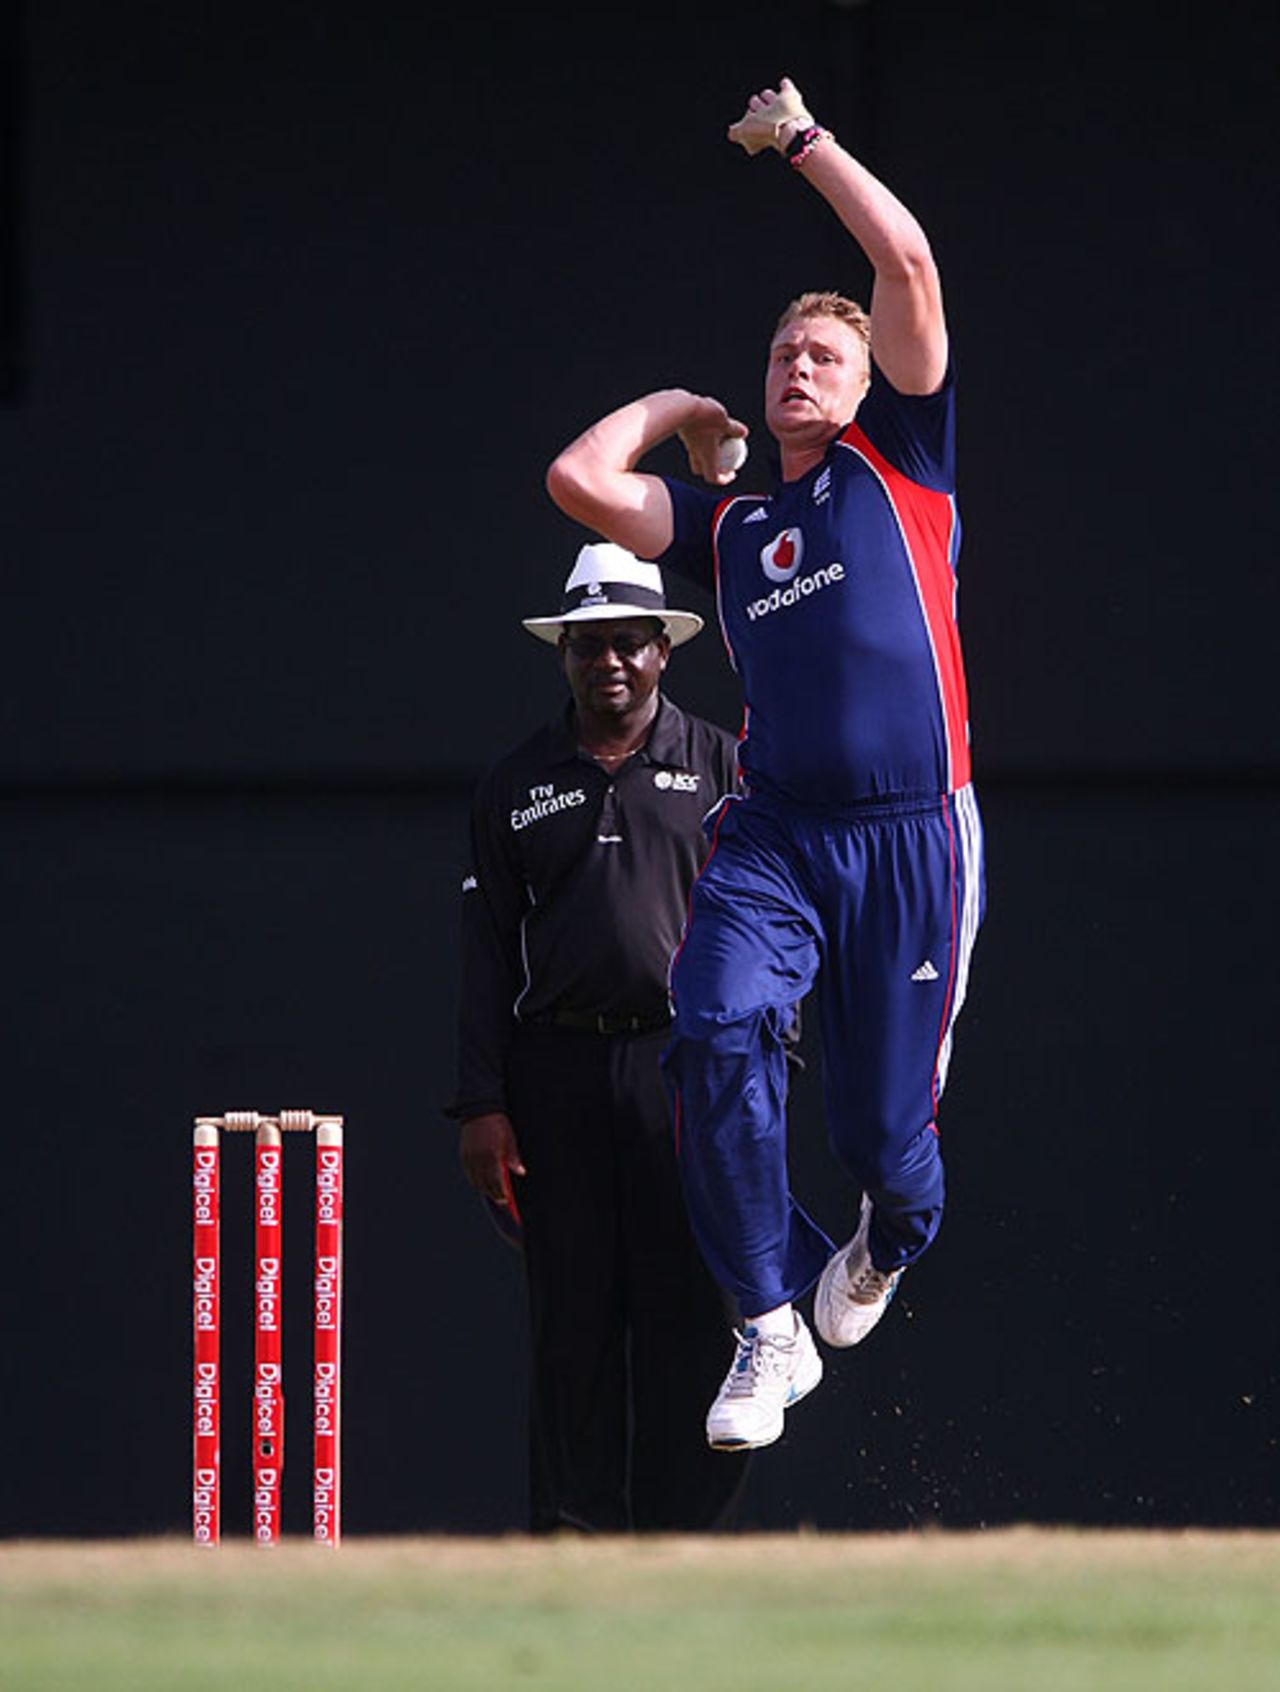 Andrew Flintoff claimed two key wickets to push West Indies onto the defensive, West Indies v England, 5th ODI, St Lucia, April 3, 2009